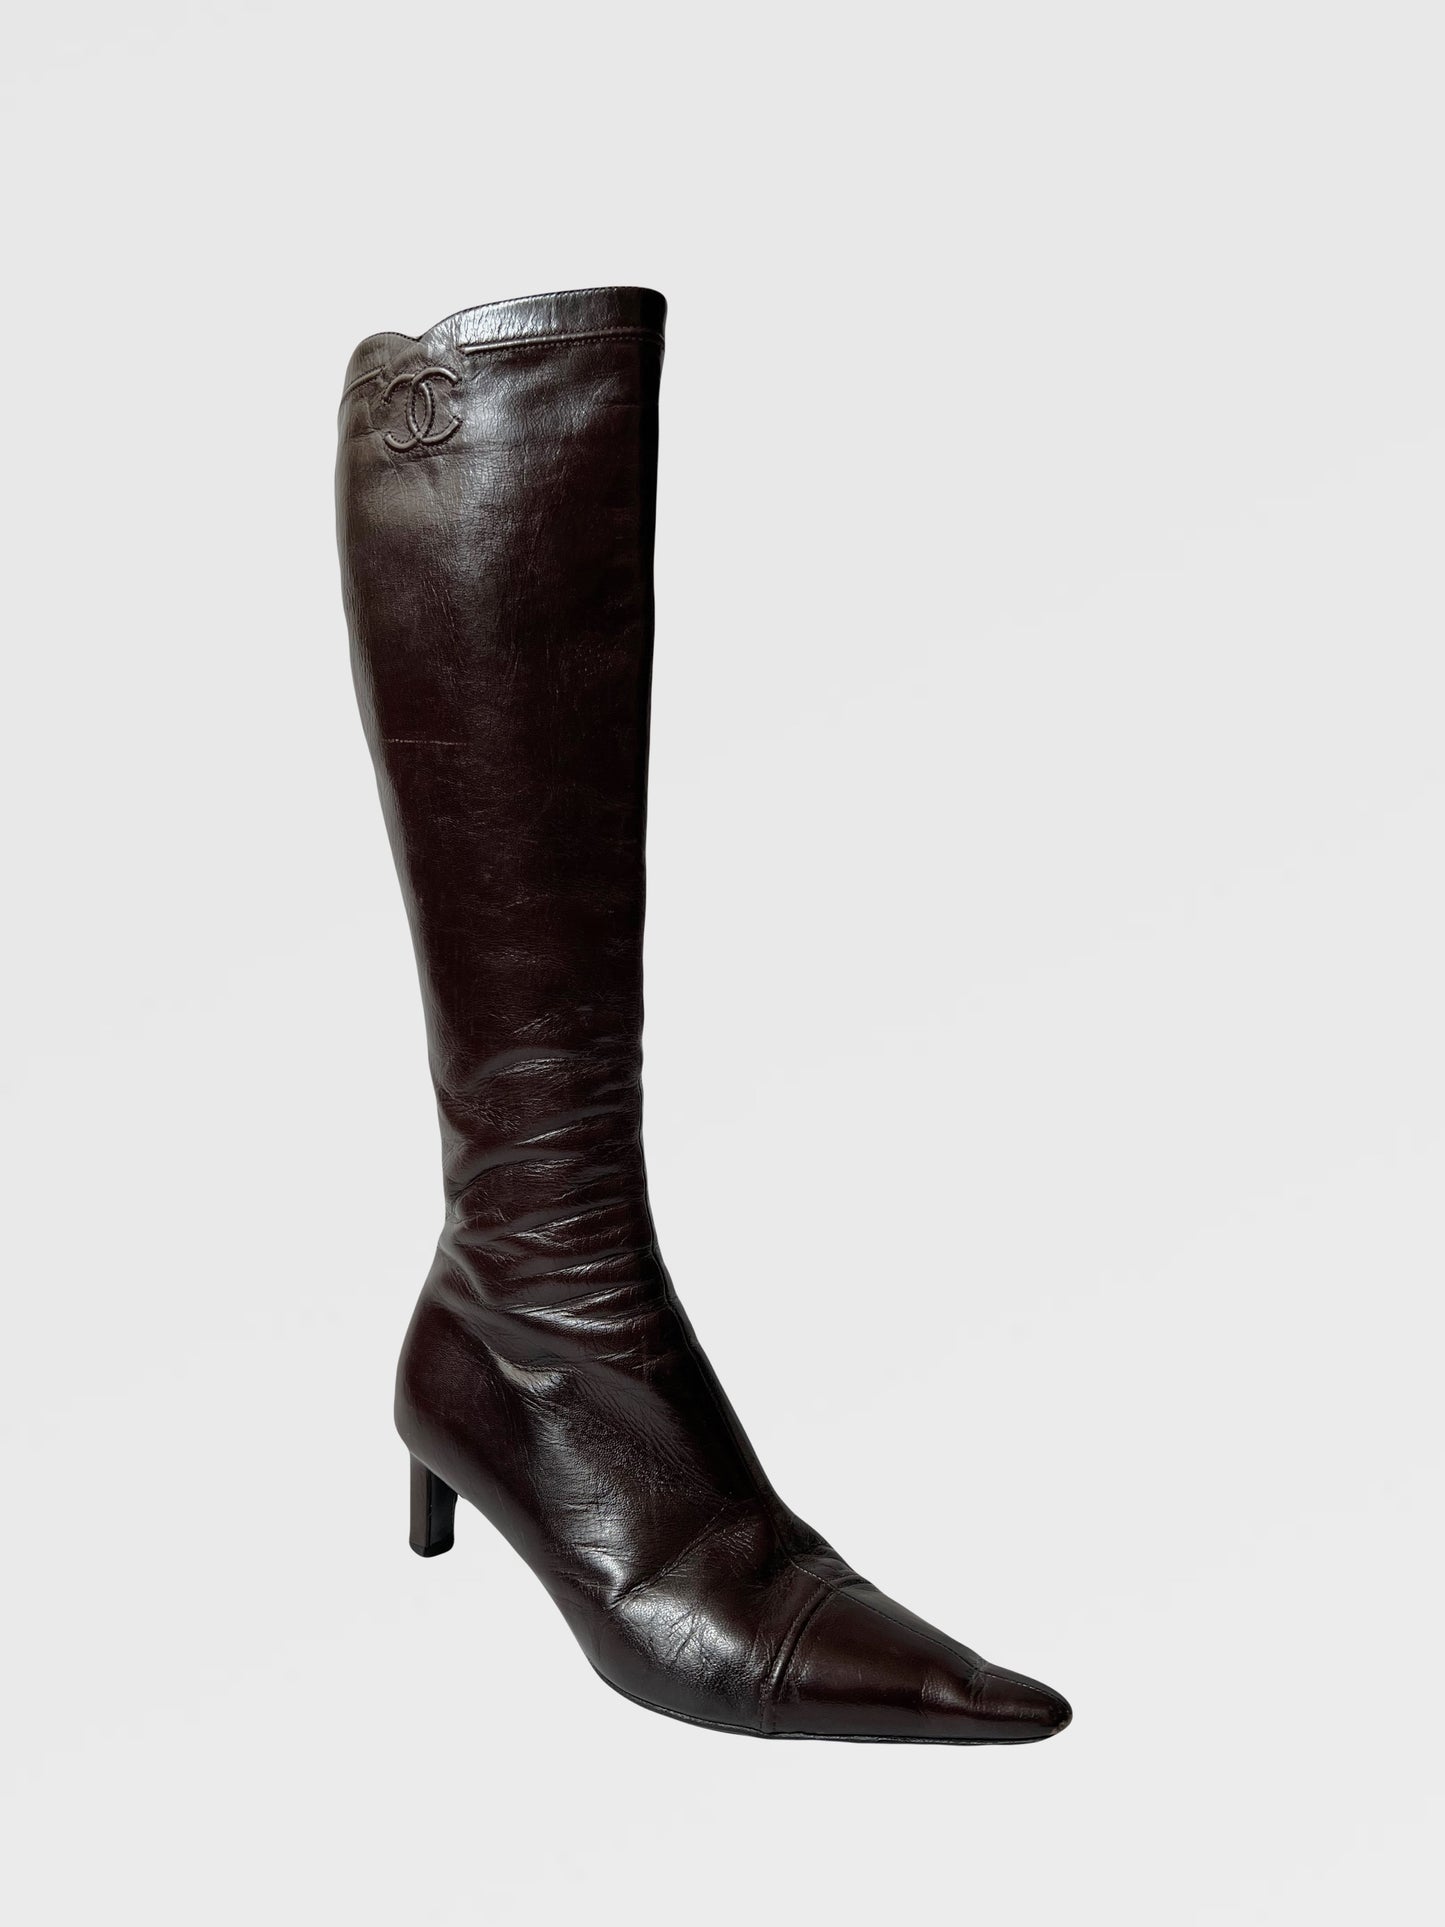 Chanel Knee High Boots, IT 38.5